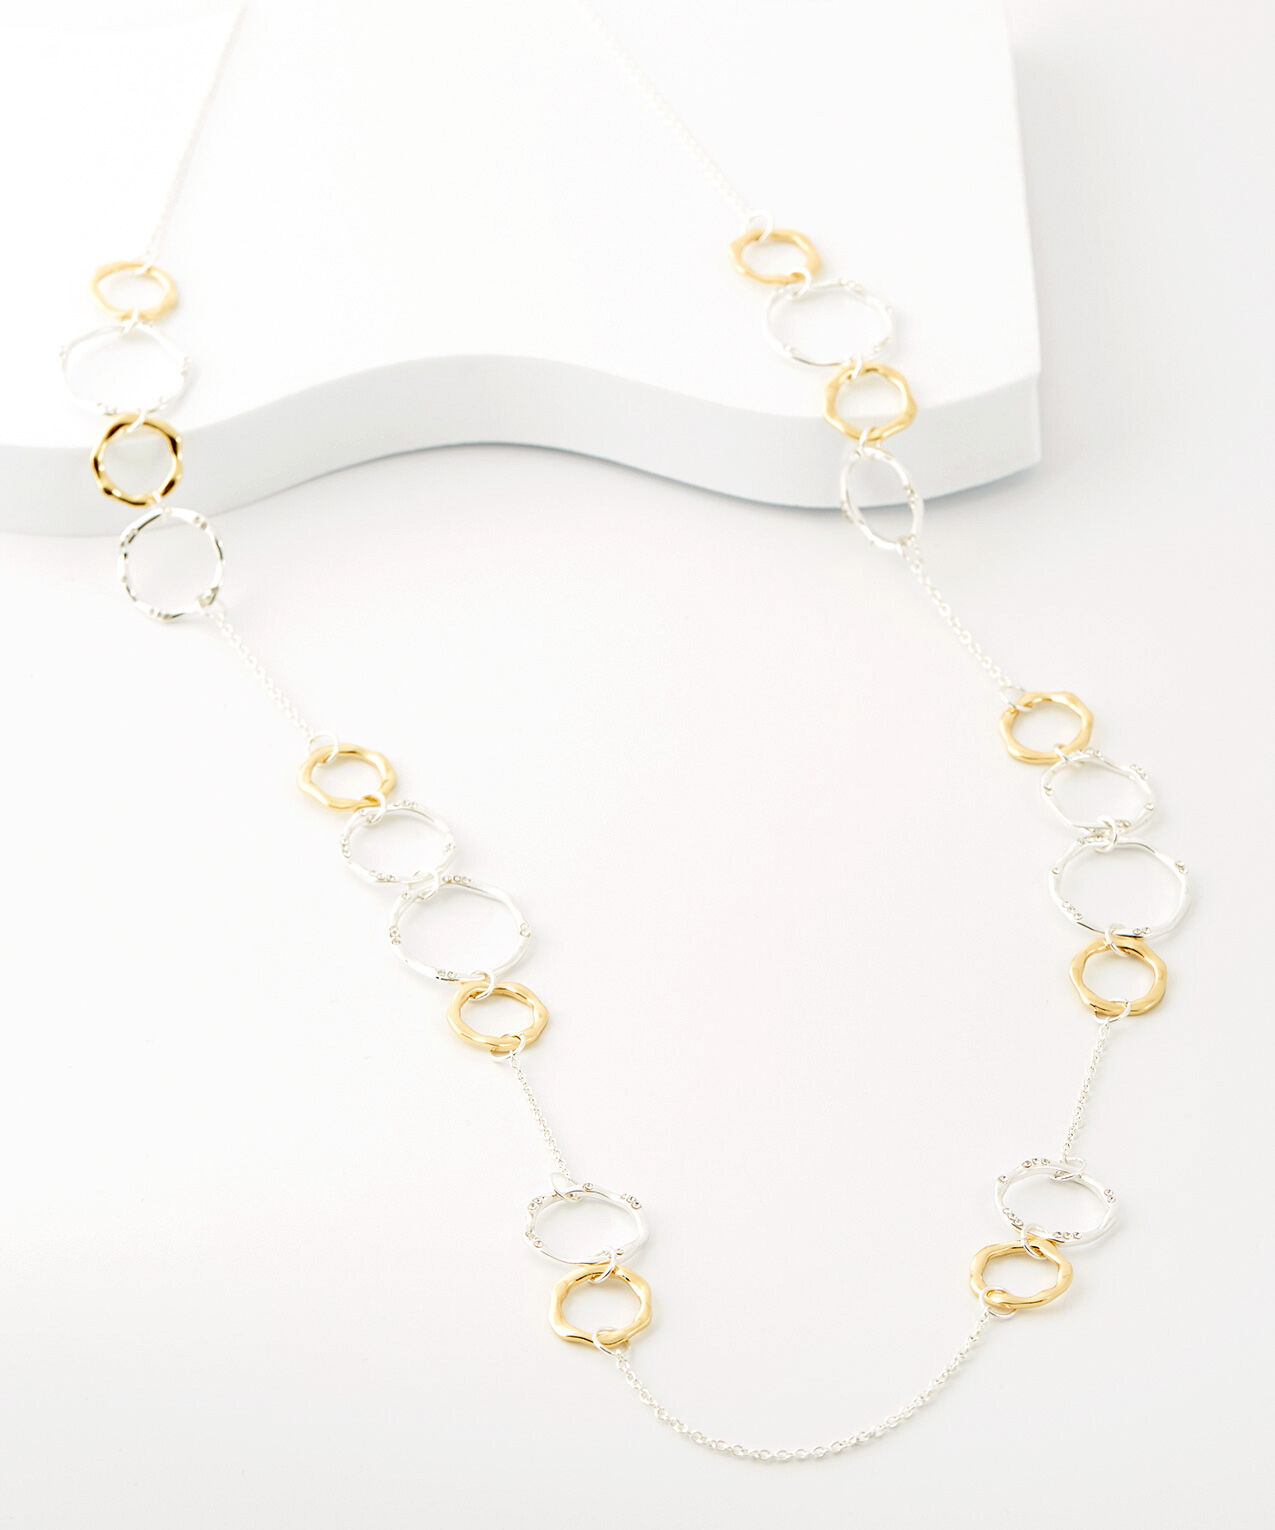 Long Silver and Gold Multi-Ring Necklace